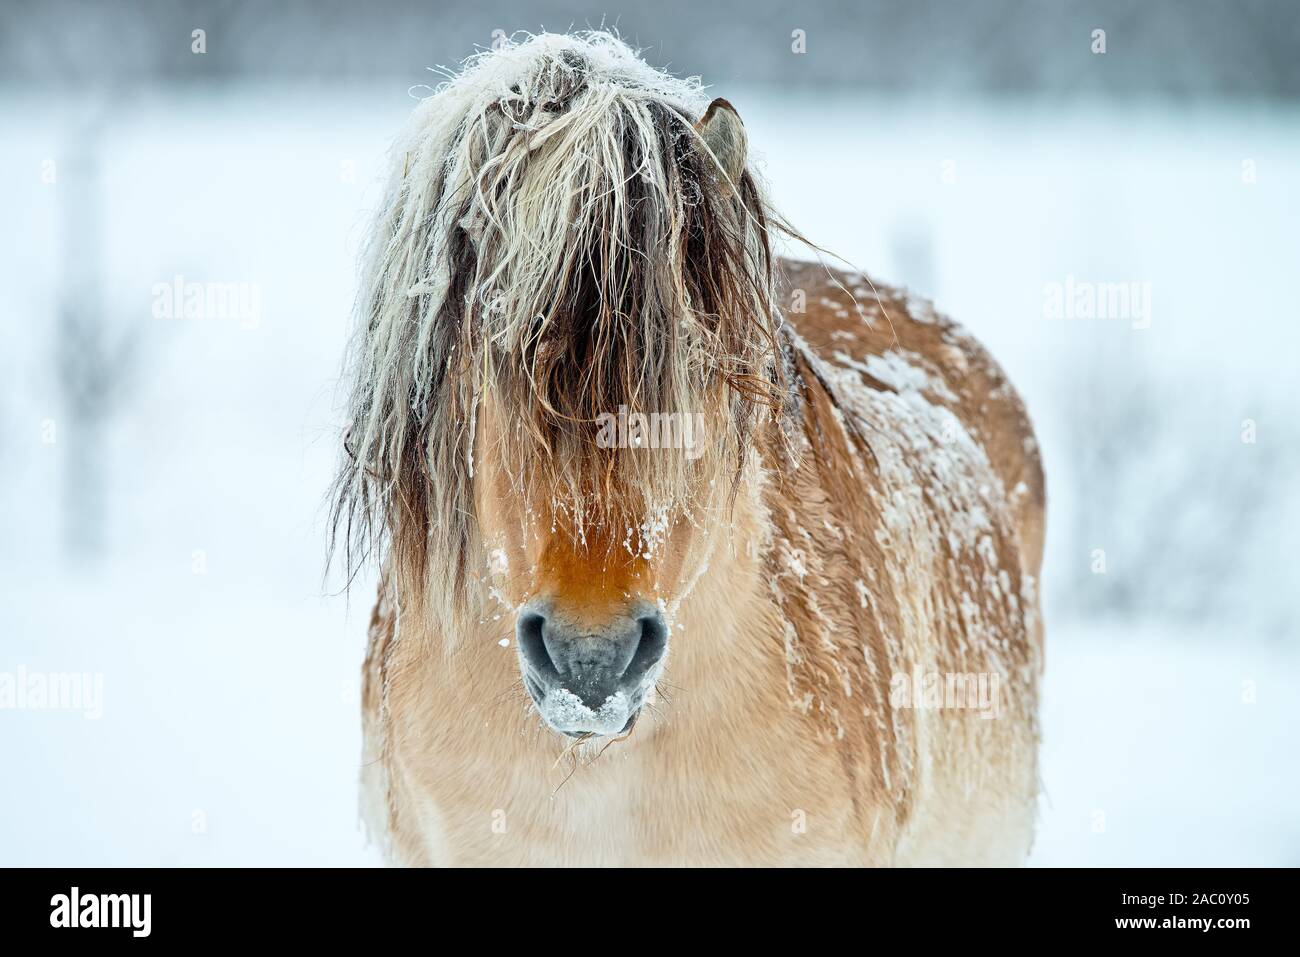 Shaggy horse with long forelock hair, with snow on it's back. Stock Photo